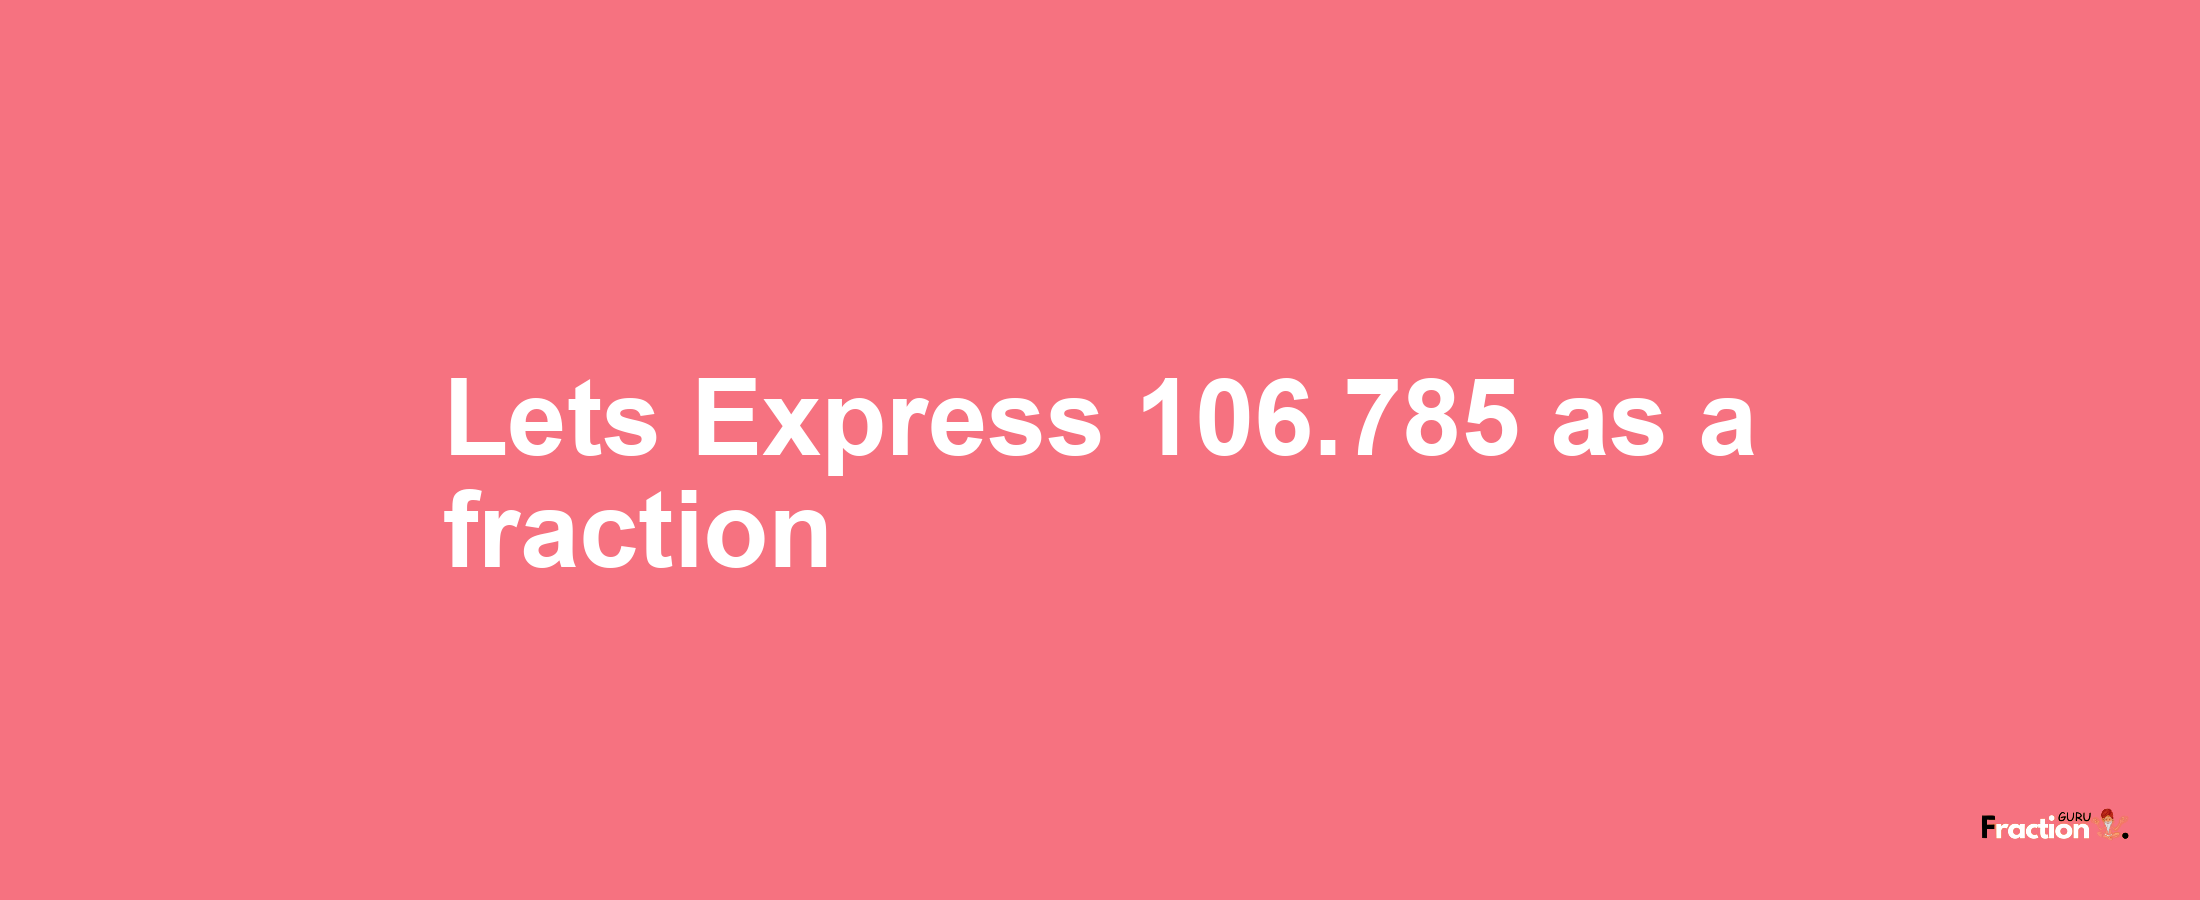 Lets Express 106.785 as afraction